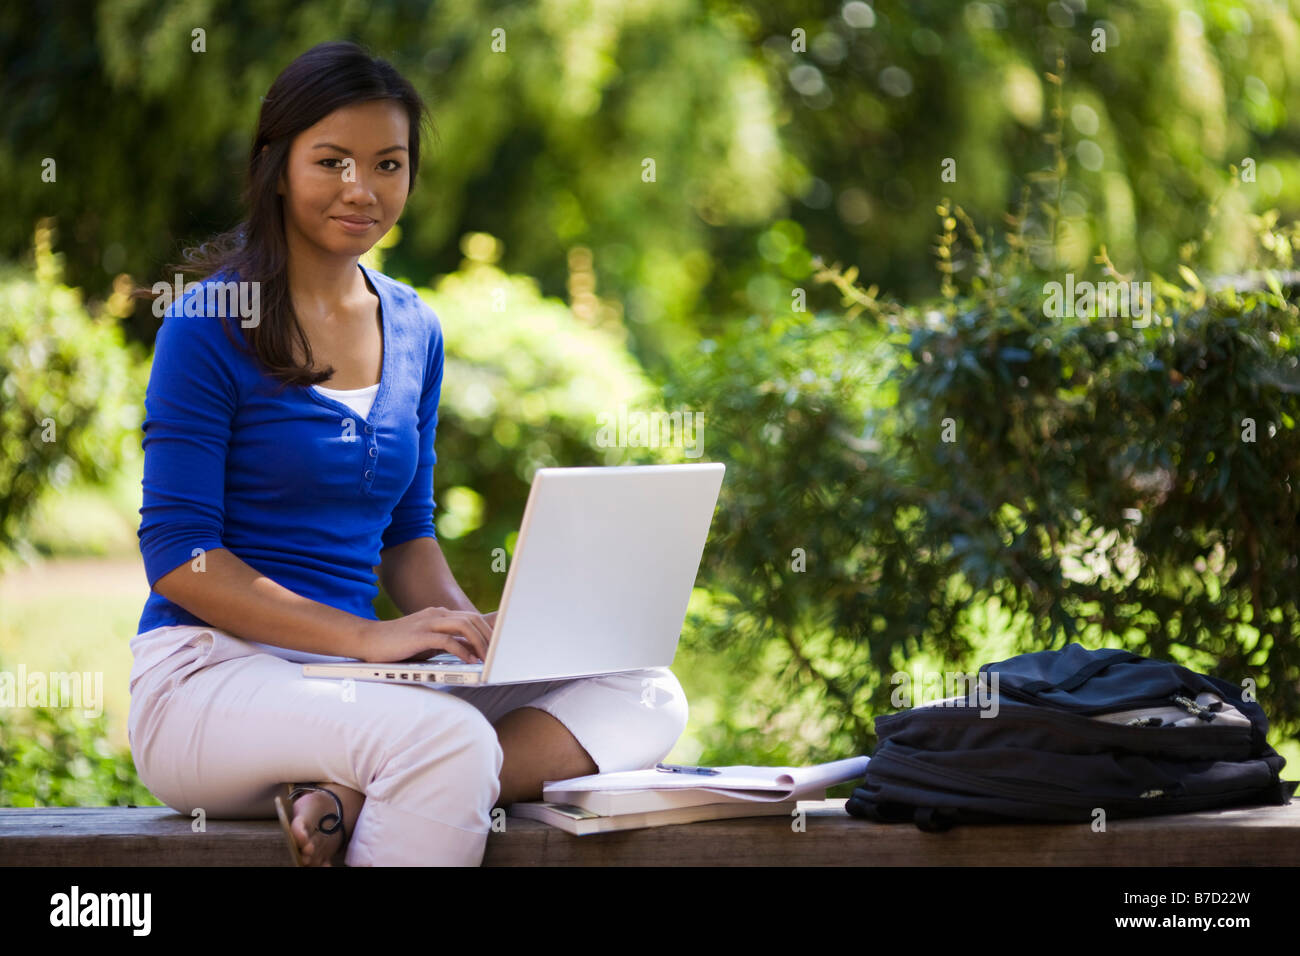 Young woman sitting on a bench with a laptop Stock Photo